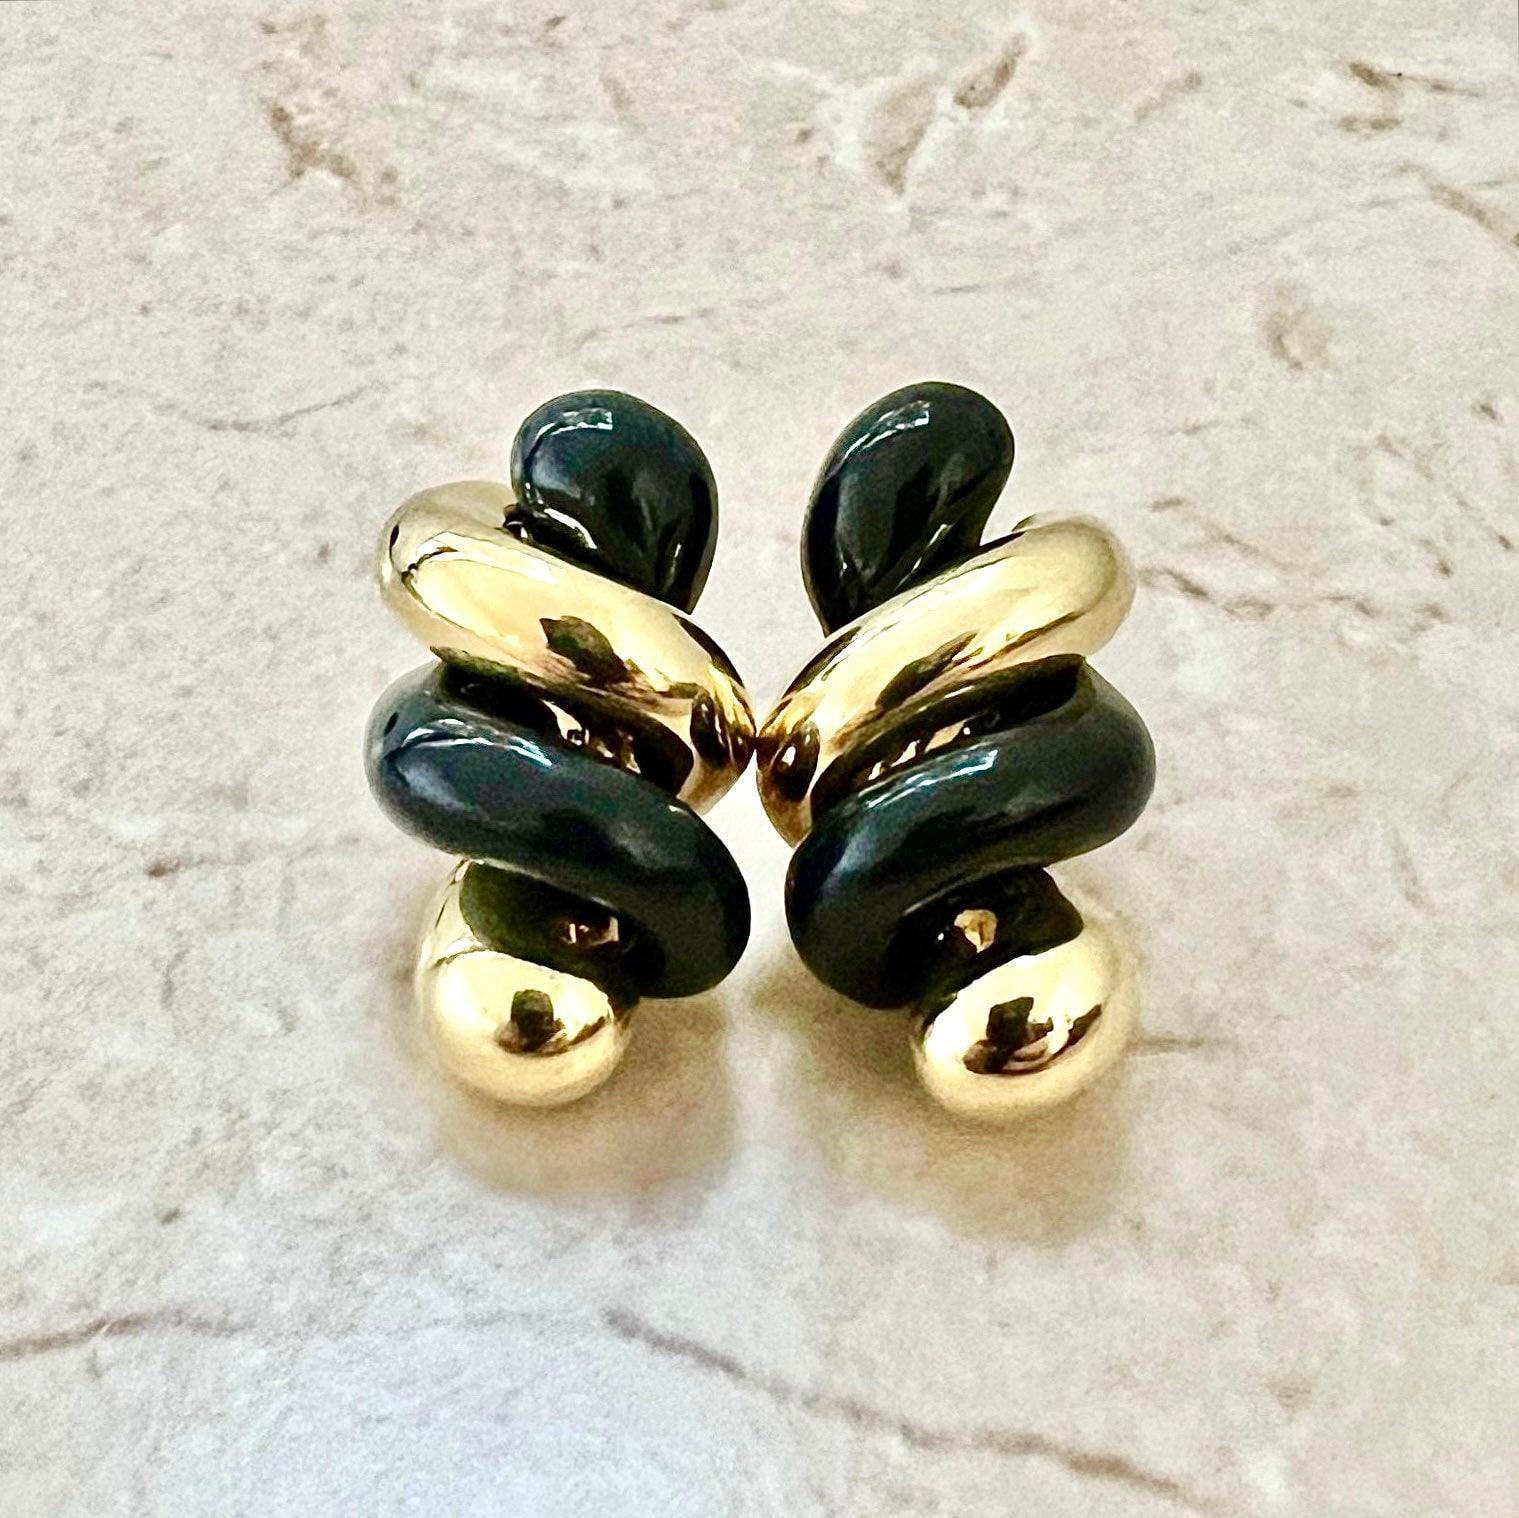 Fine Vintage 18 Karat Gold & Onyx Earrings By Carvin French - Gold Spiral Earrings - Statement Earrings - Cocktail Earrings - Gifts For Mom